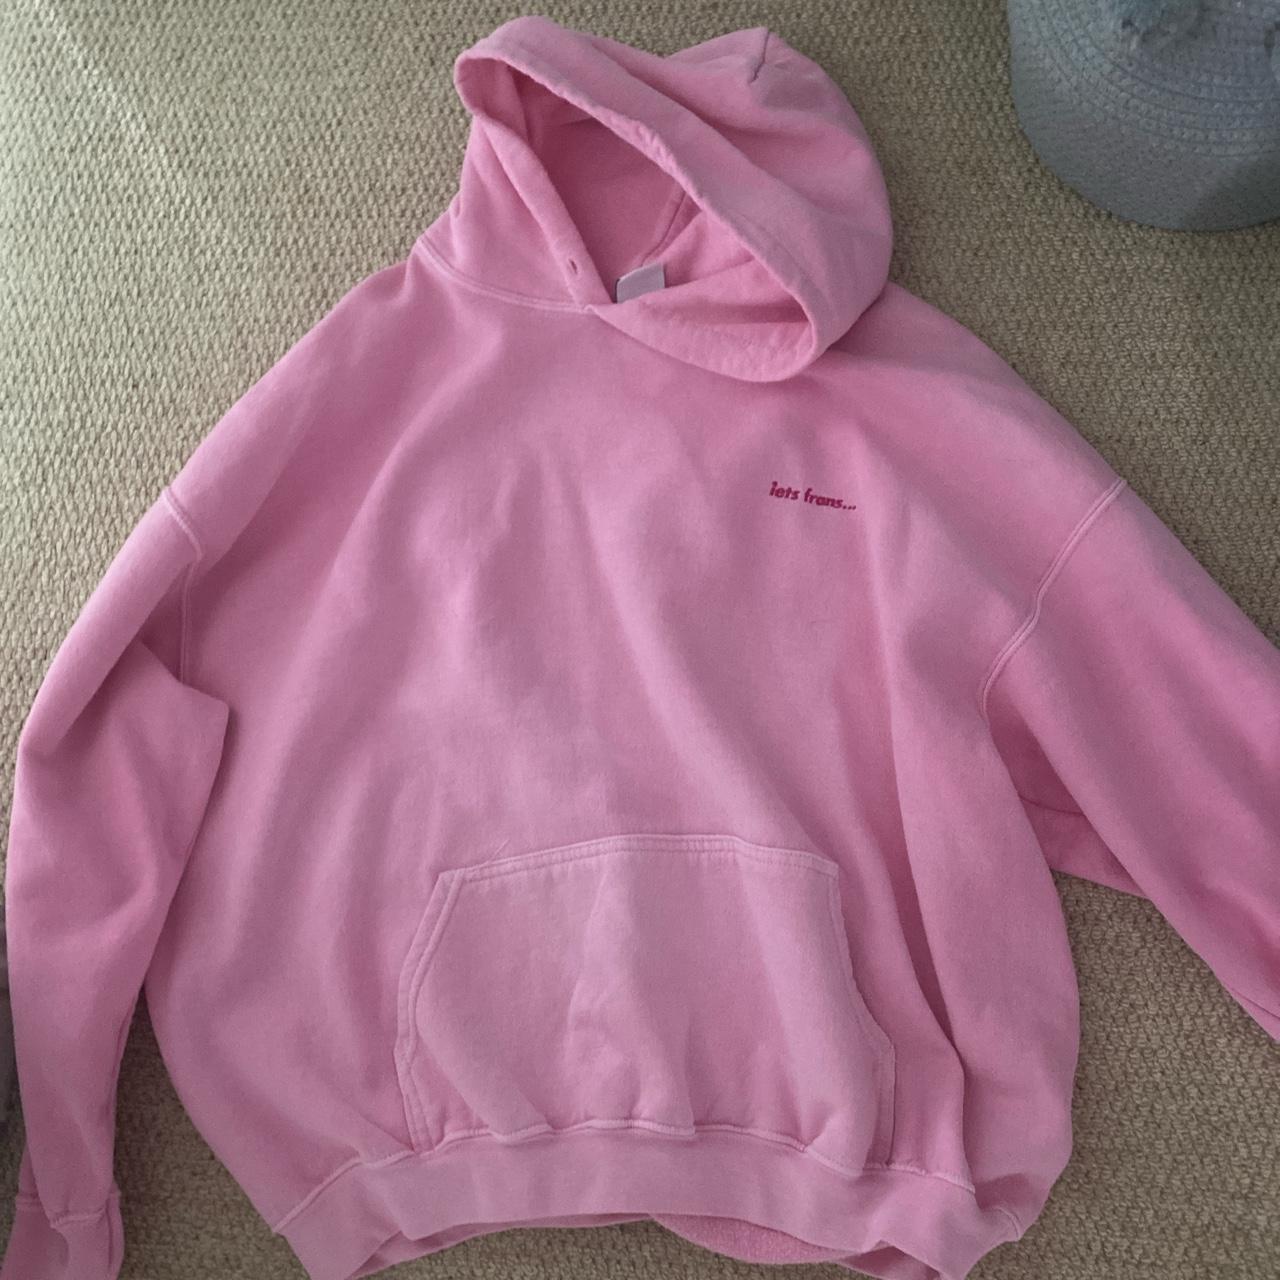 Pink Urban Outfitters iets frans hoodie. Size Medium... - Depop